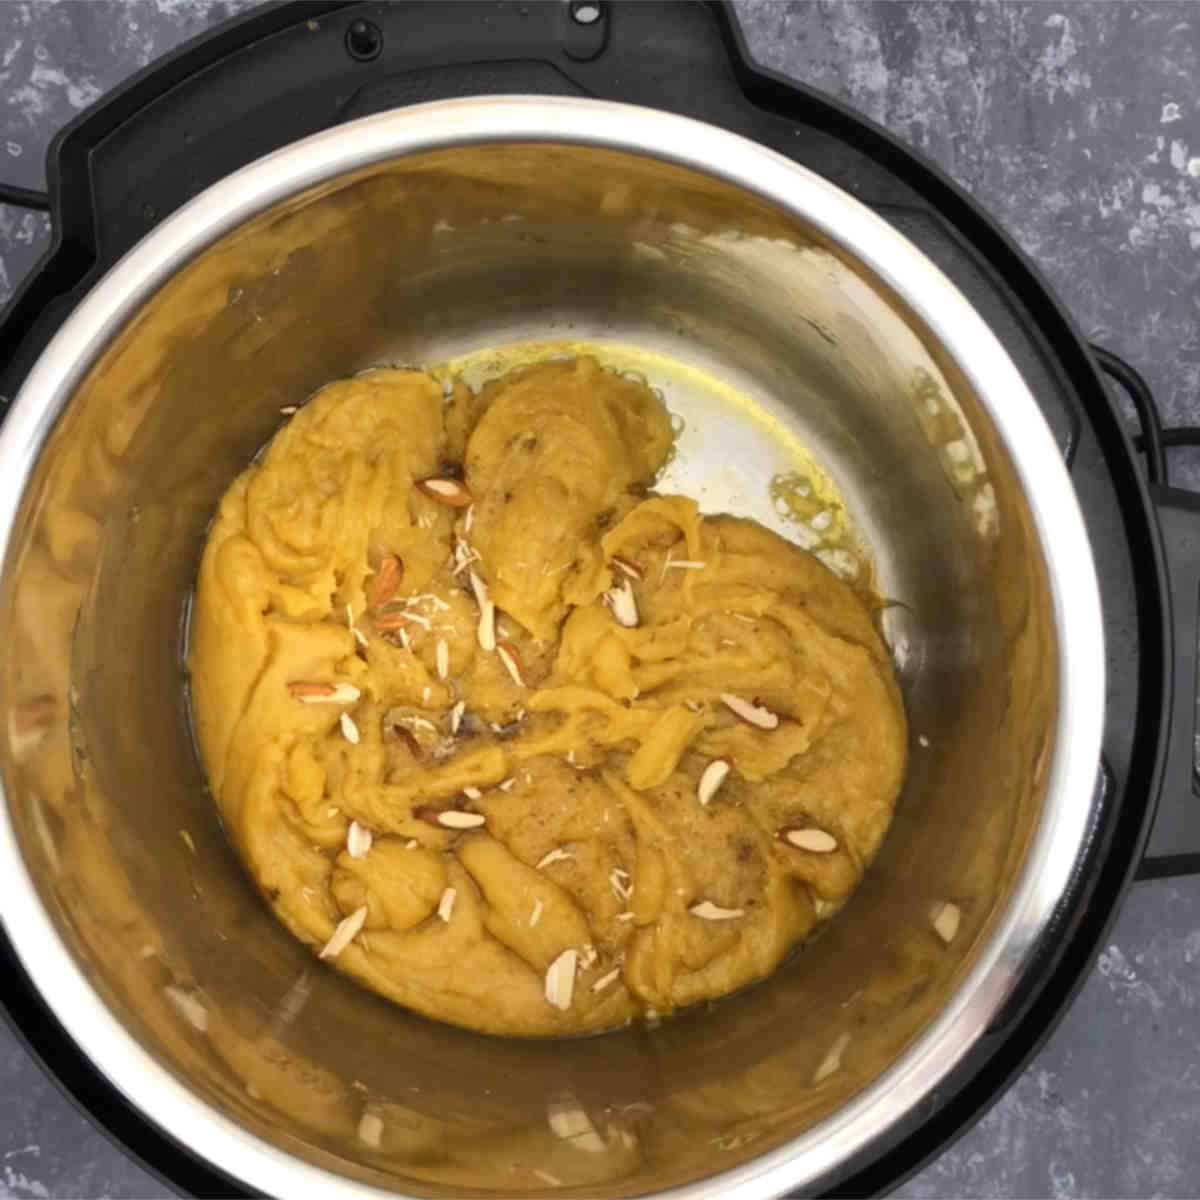 Add chopped nuts to moong dal halwa in Instant Pot.